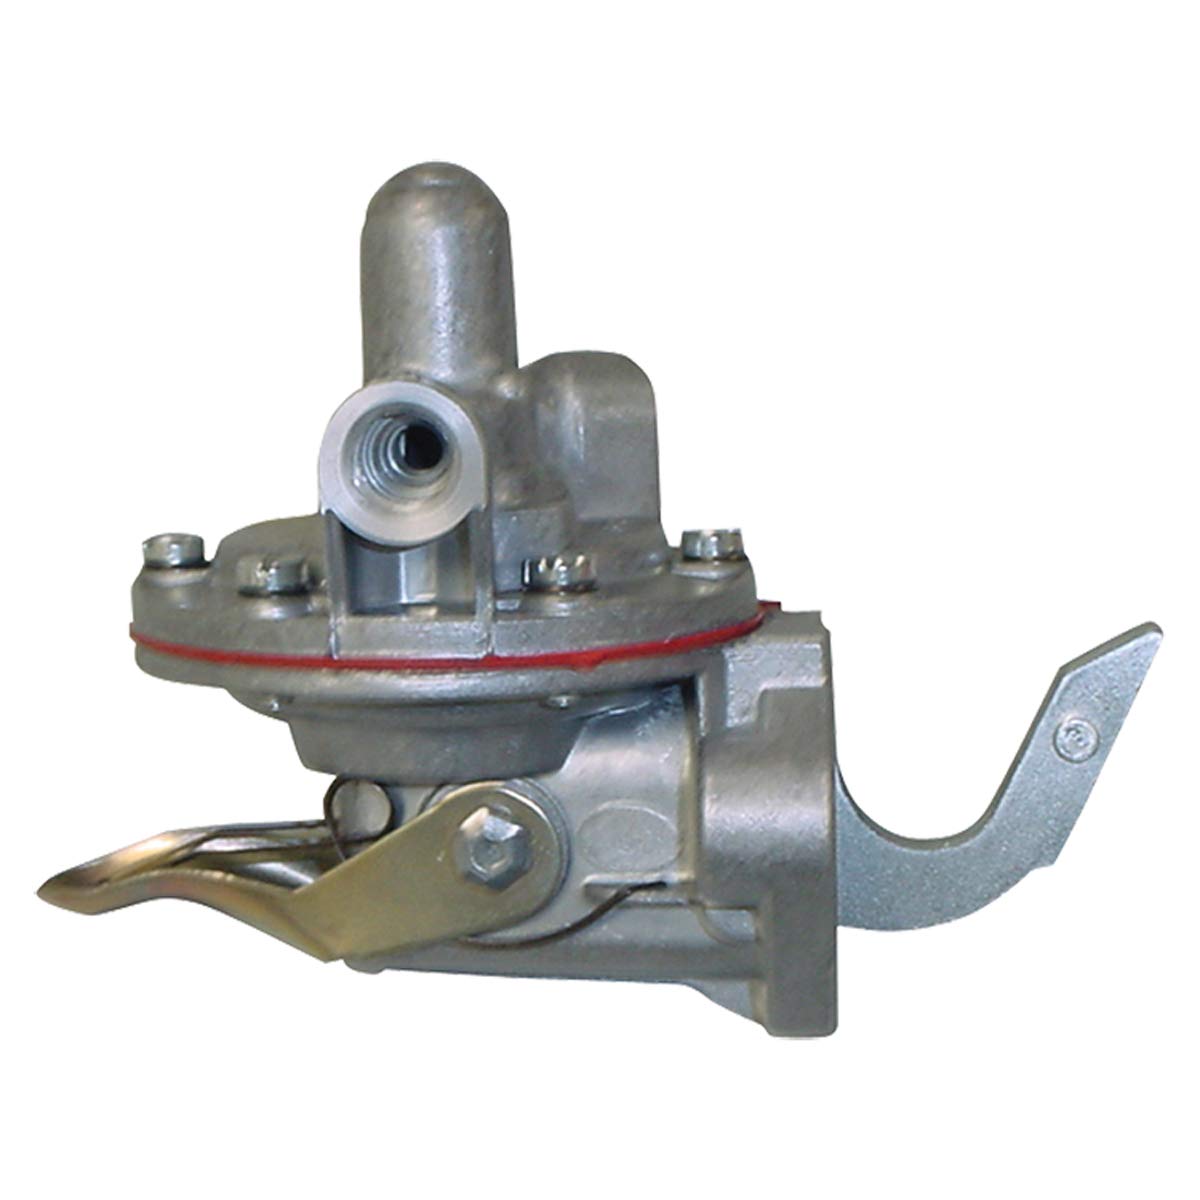 Lift Pump Assembly Suppliers in India